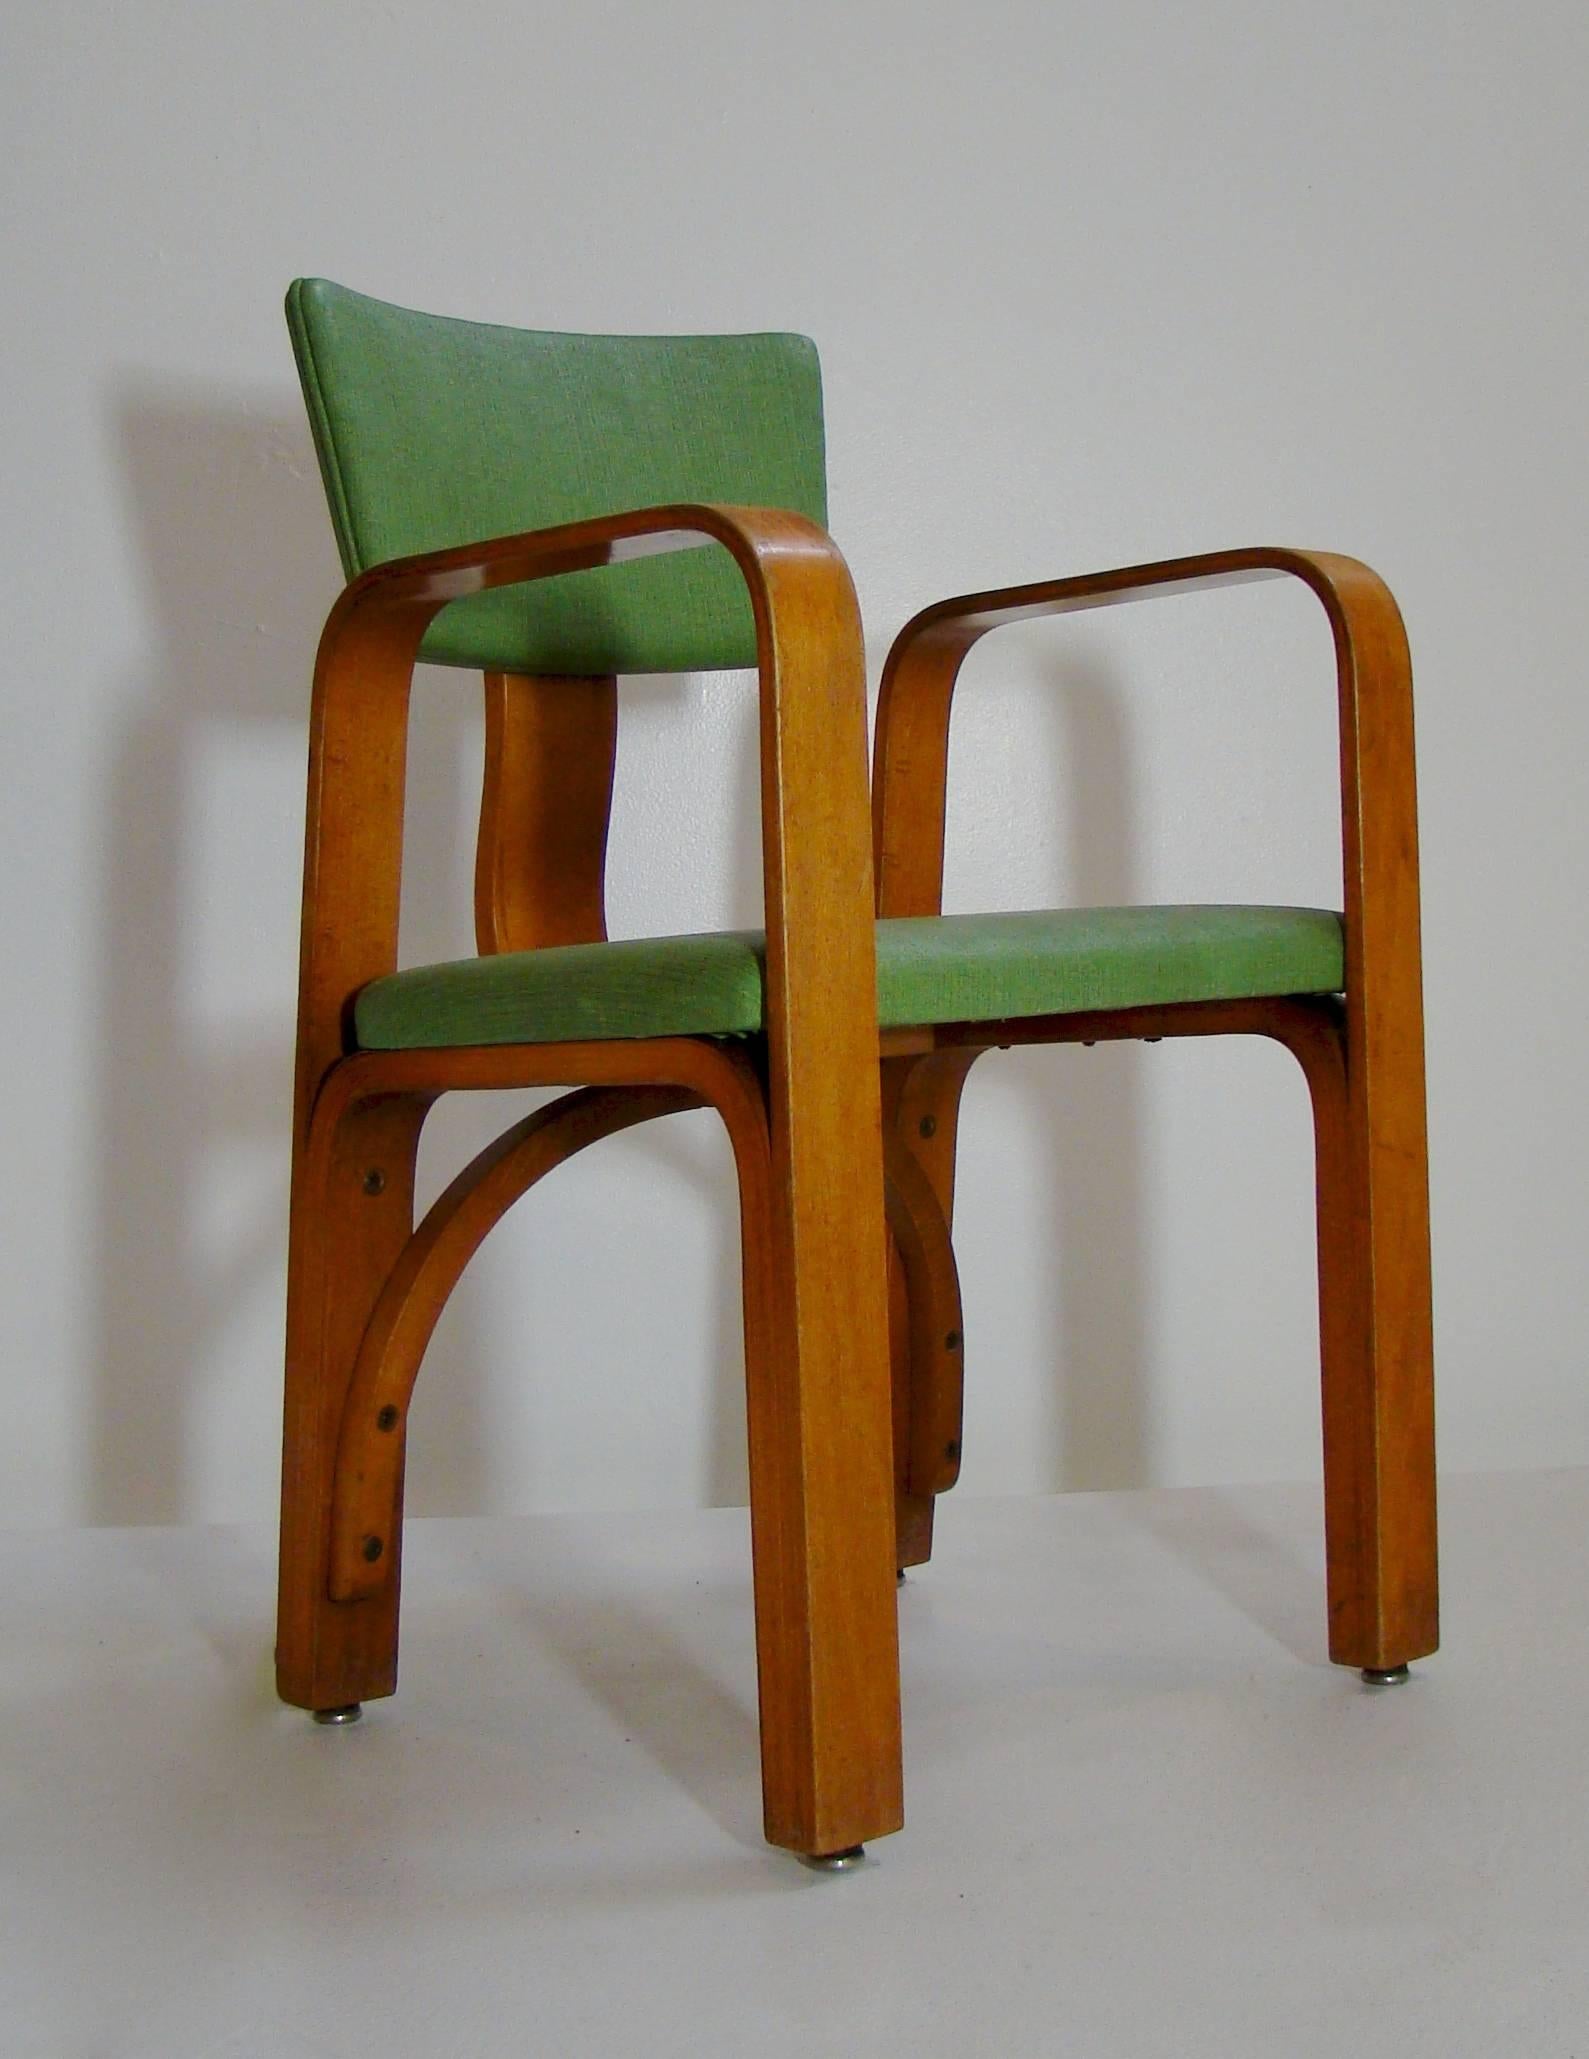 Rare surviving bentwood and green vinyl upholstered child's chair attributed to Thonet.